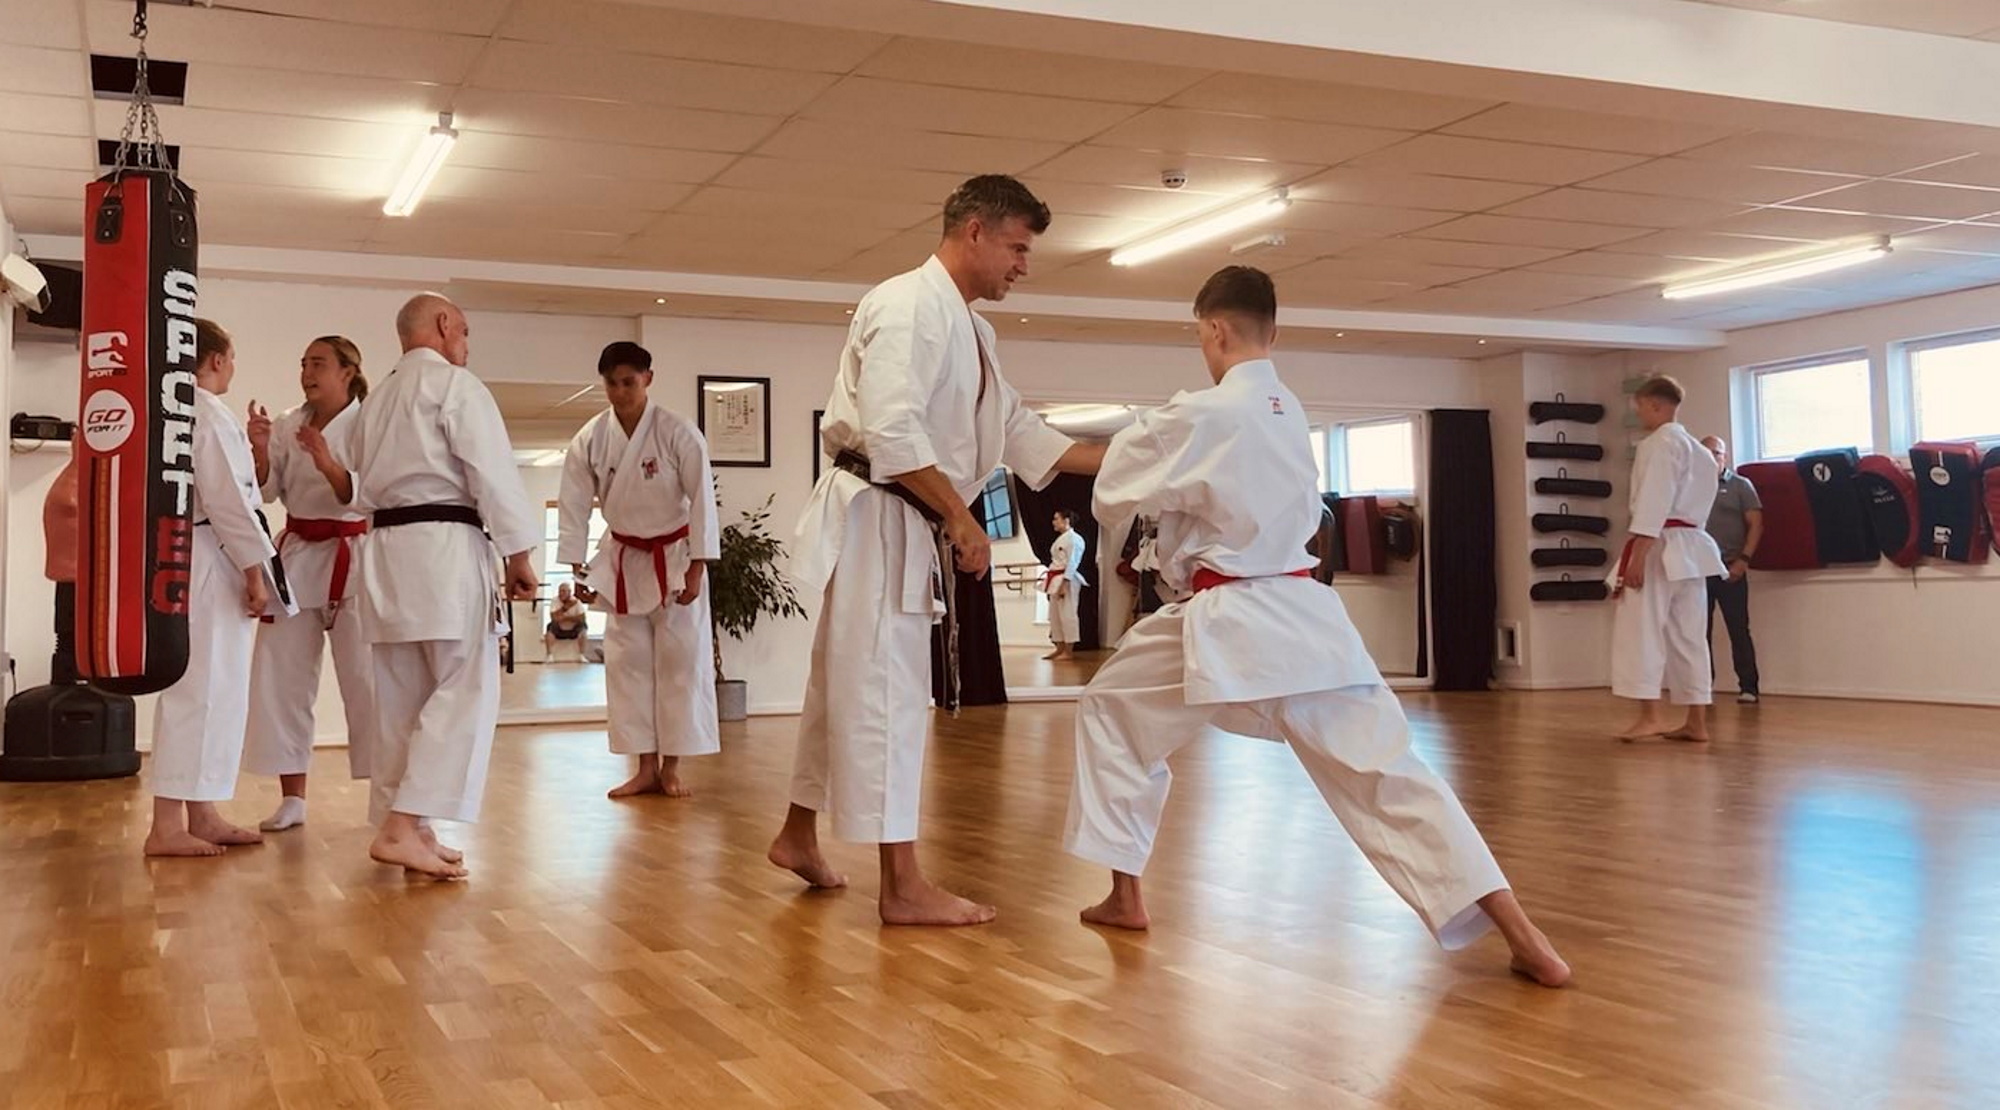 Karate coach passes on advice to a student as they practise a technique